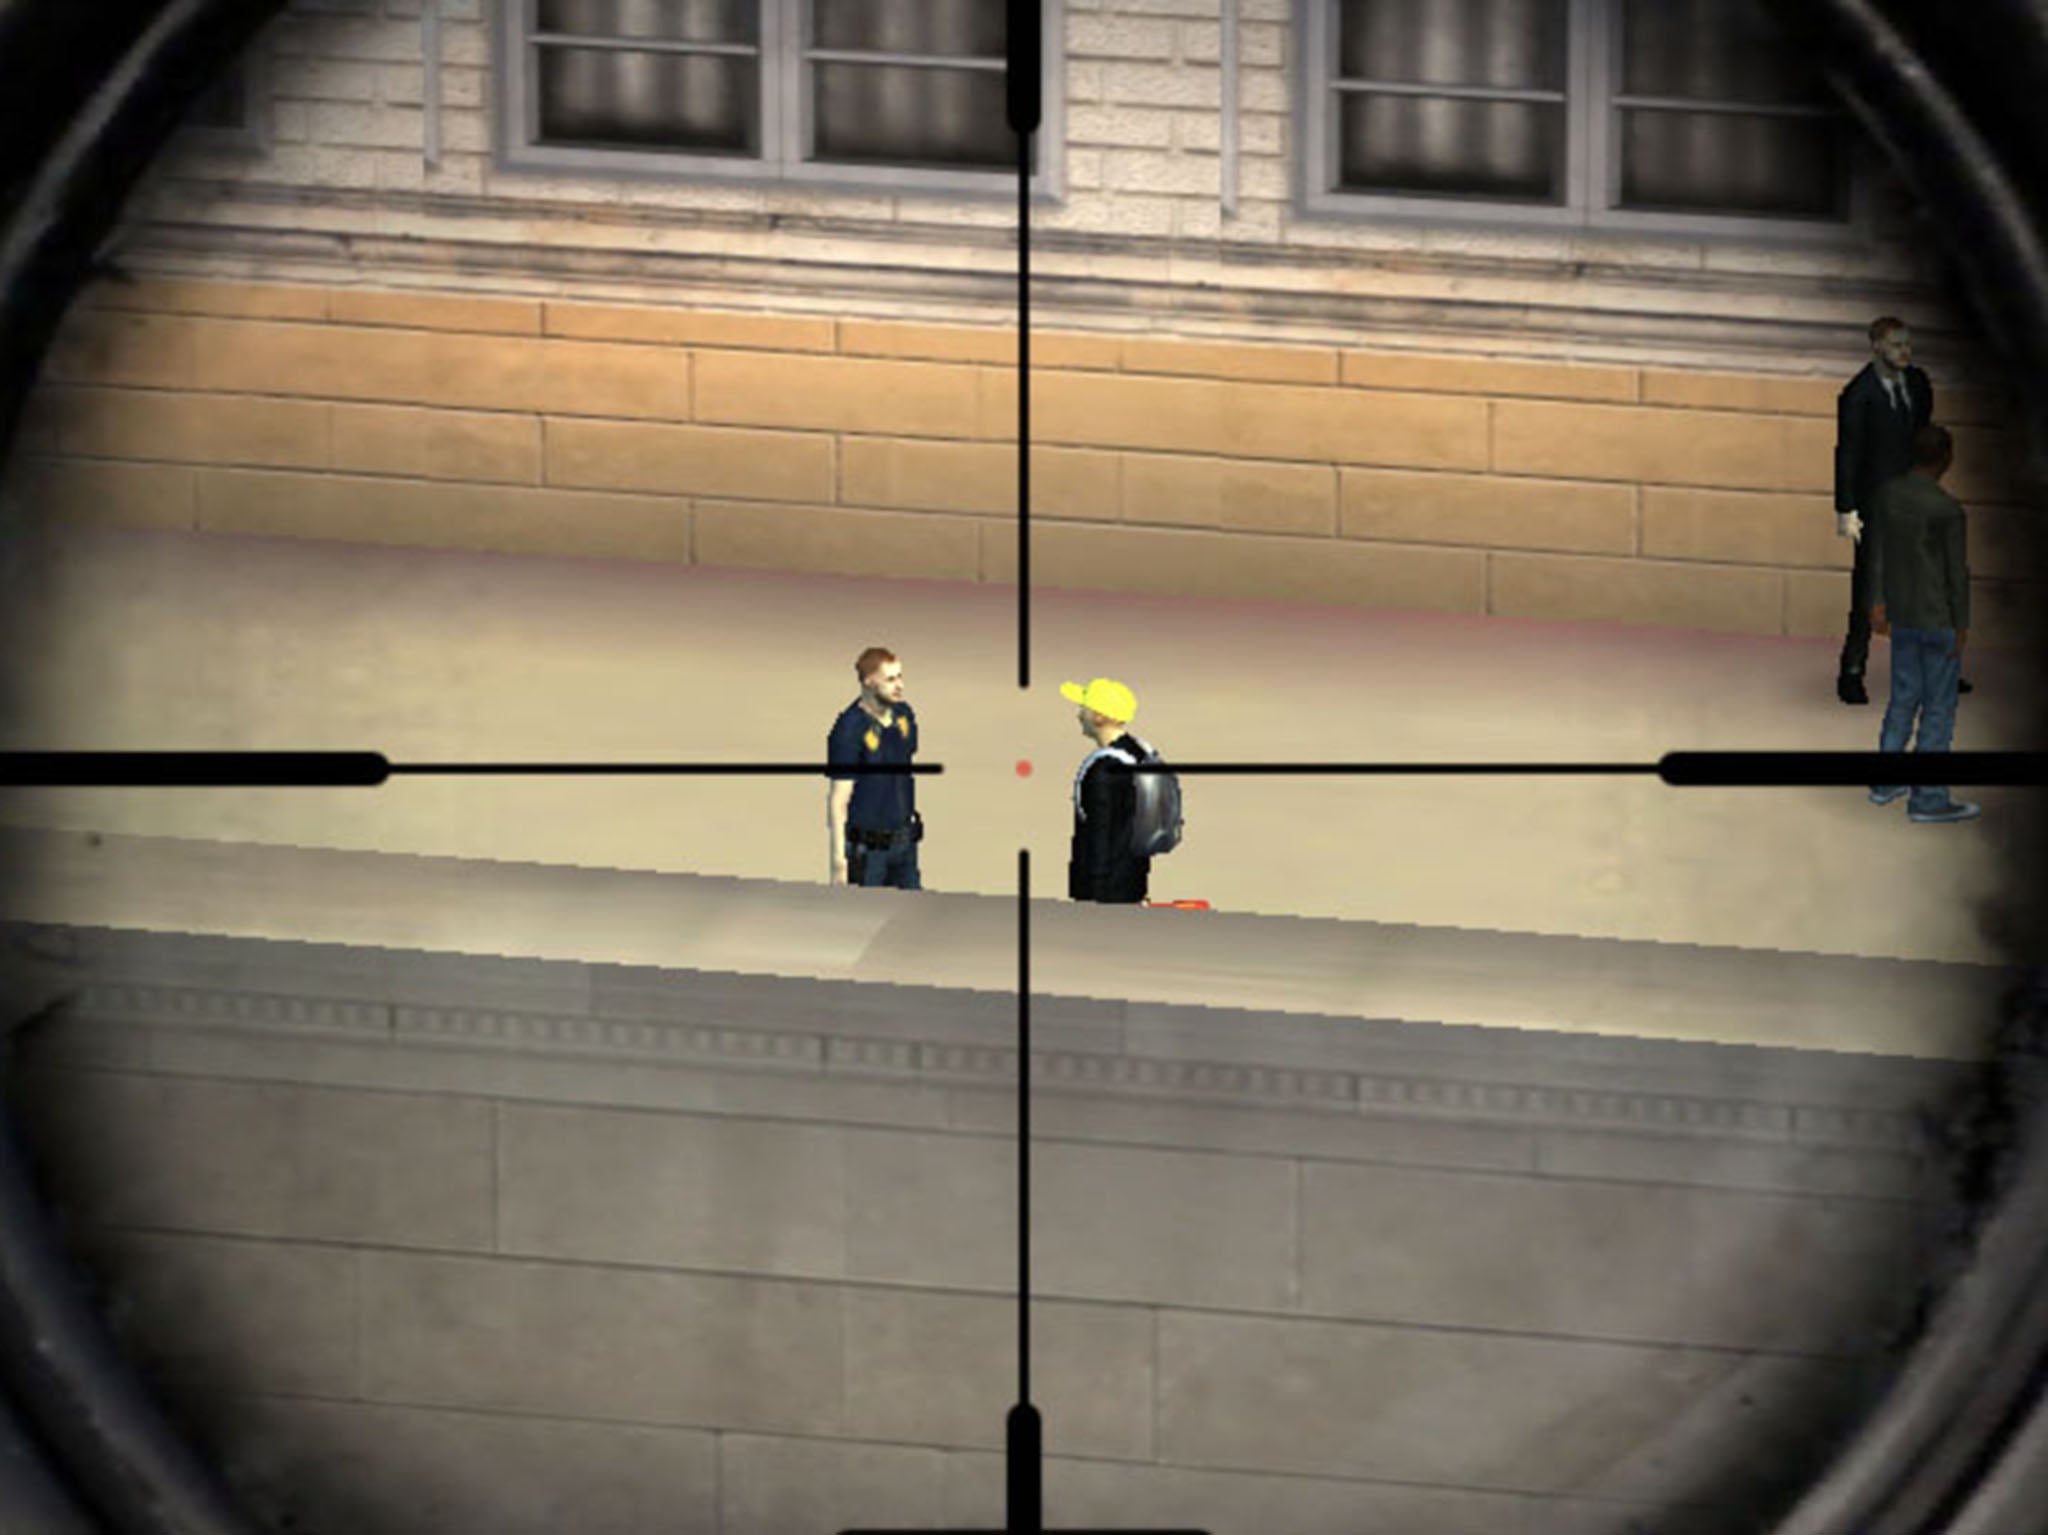 Sniper 3D Assassin asks players to kill a journalist in the “Breaking News” mission